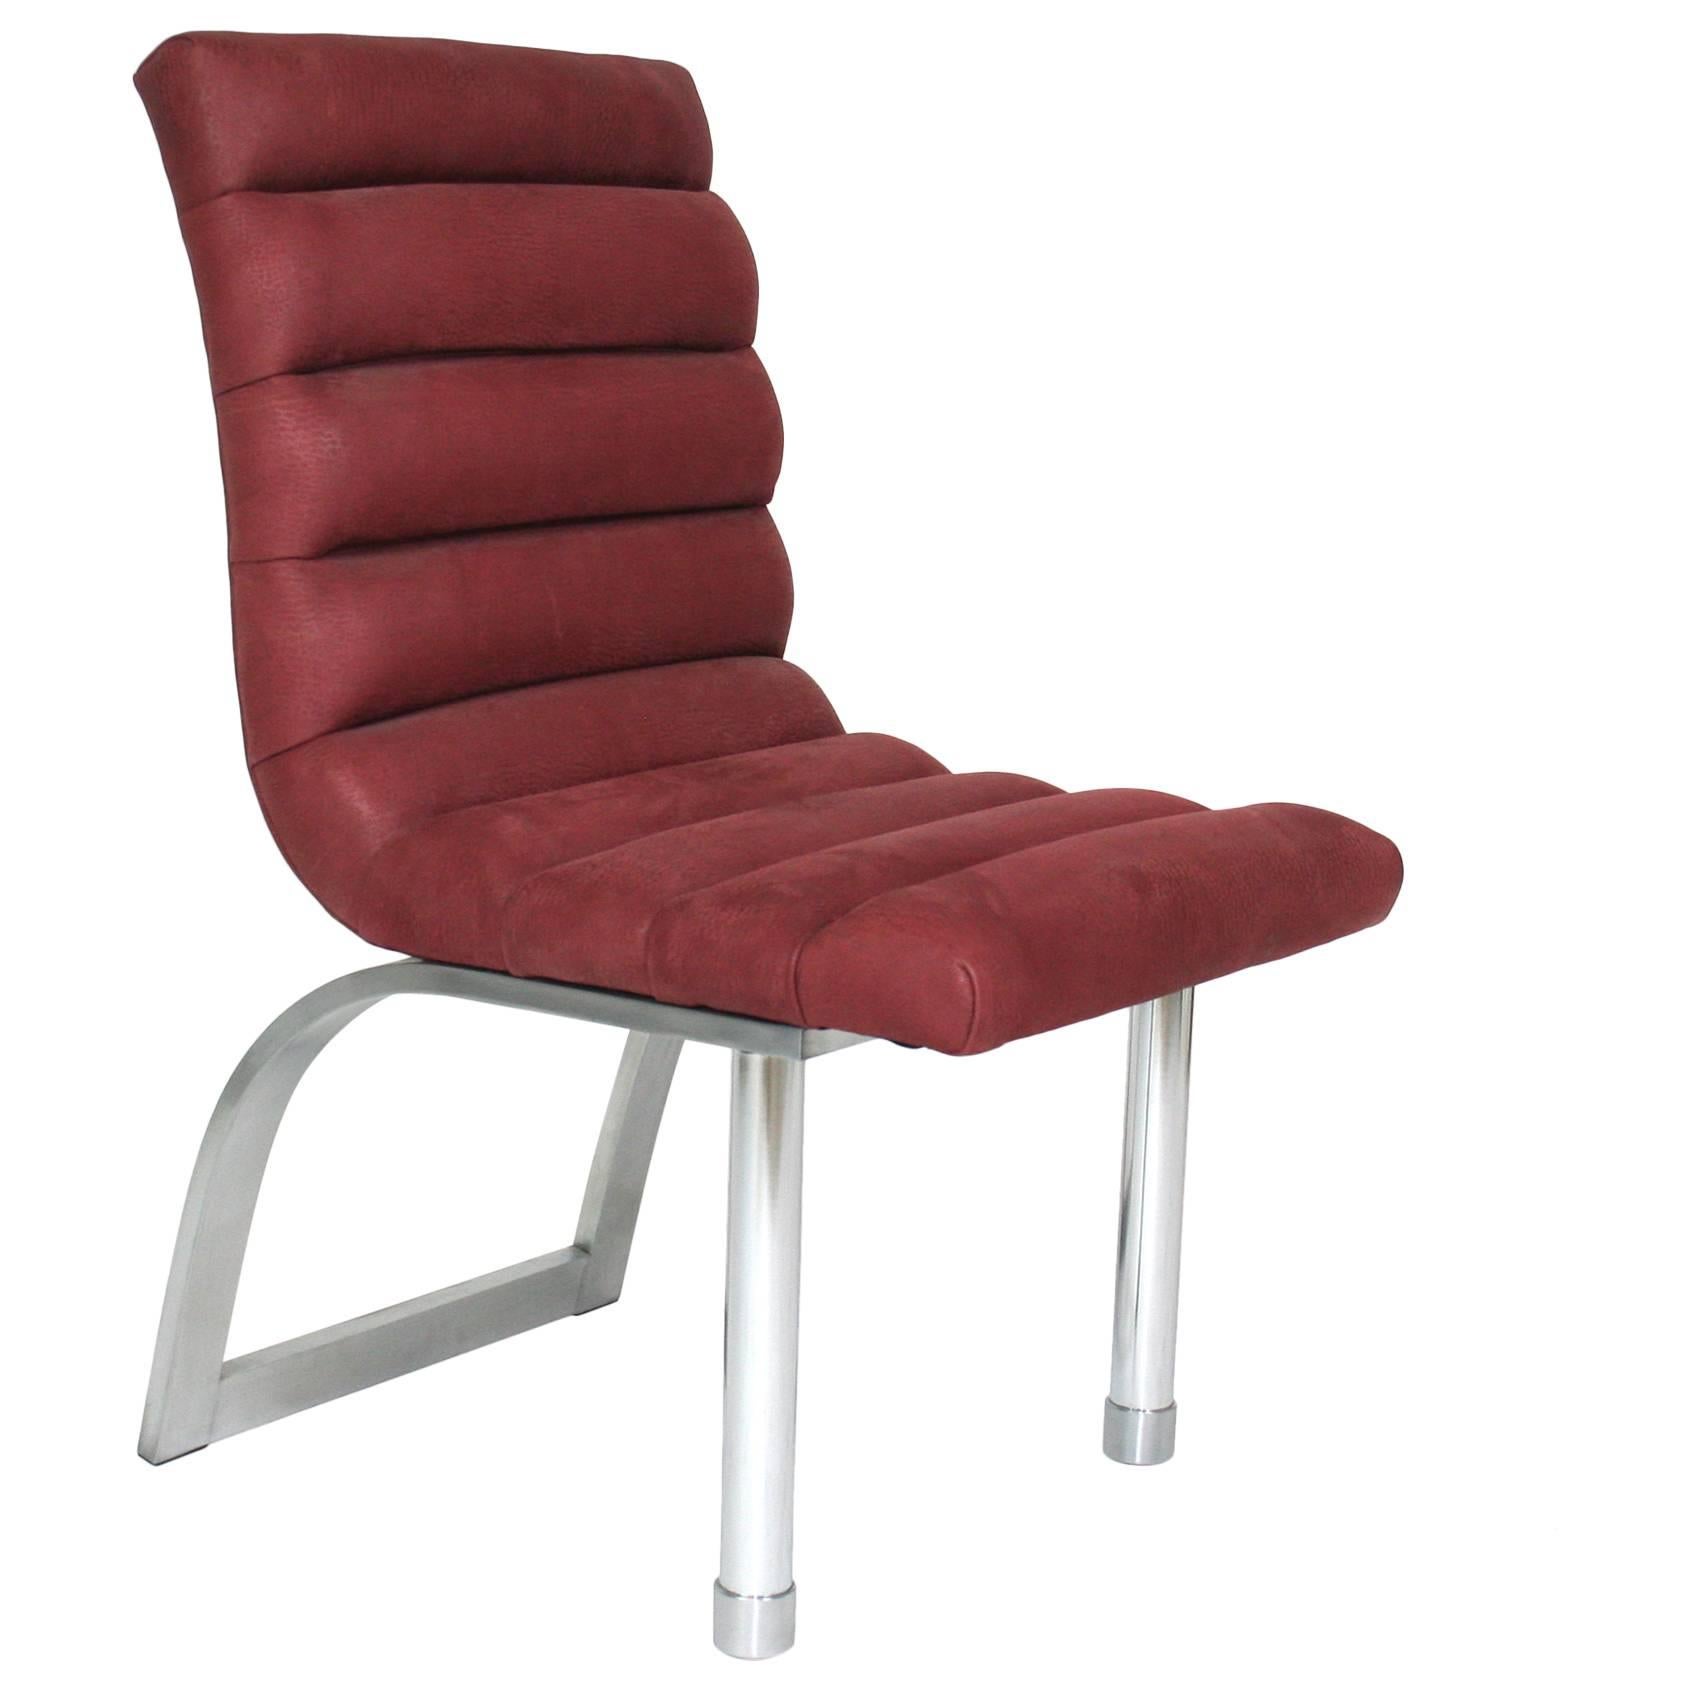 Jay Spectre for Century "Eclipse" Side Chair